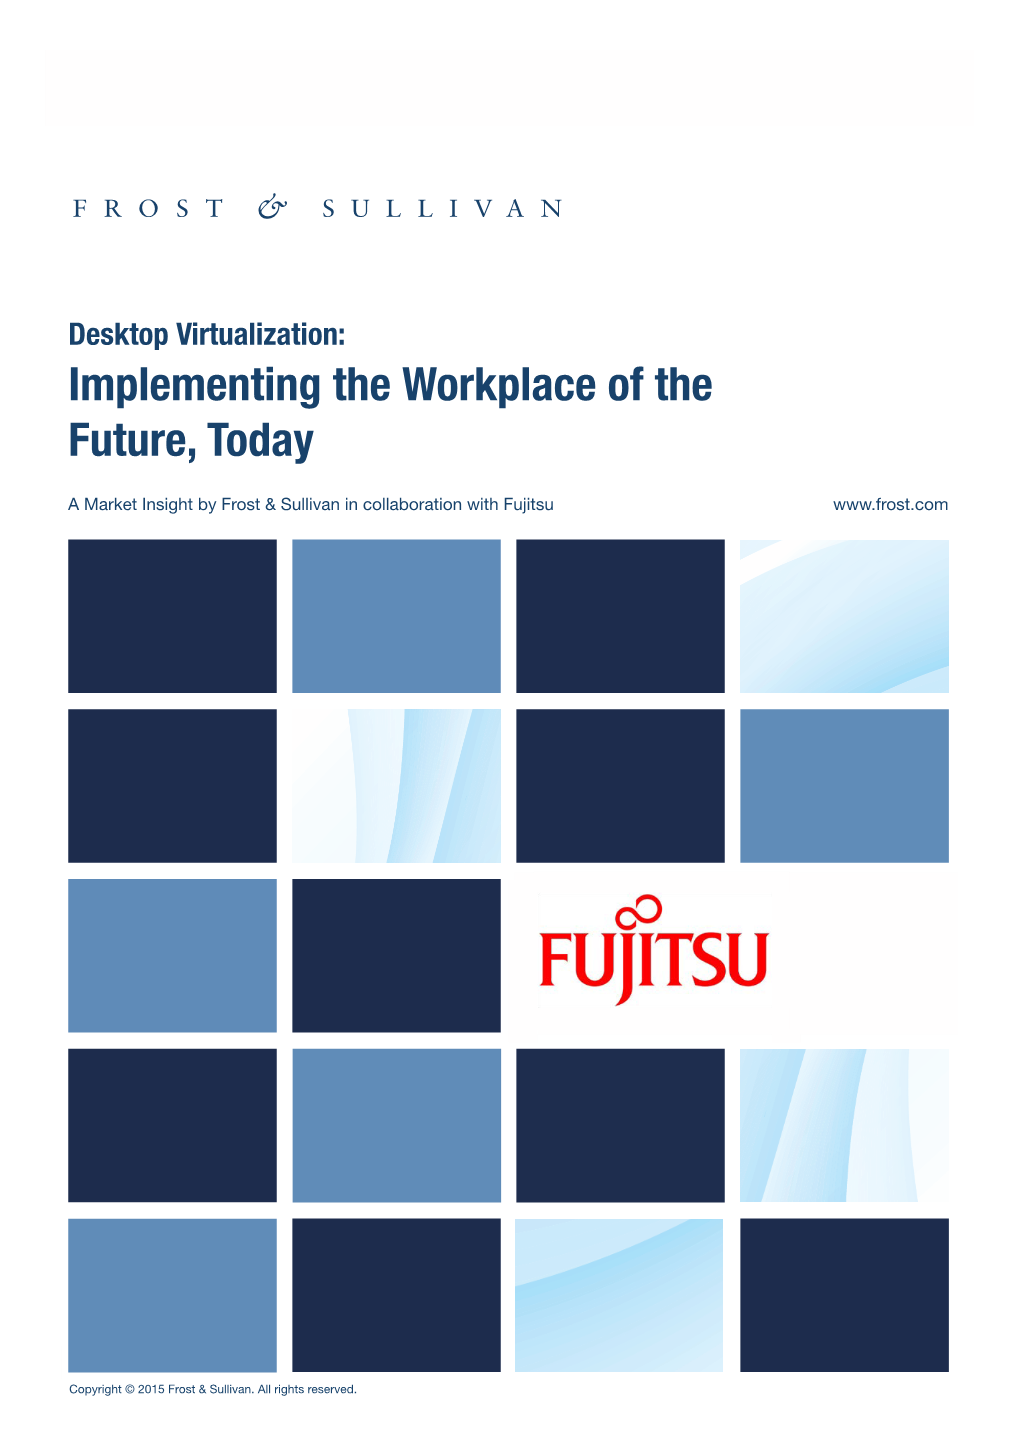 Desktop Virtualization: Implementing the Workplace of the Future, Today 1